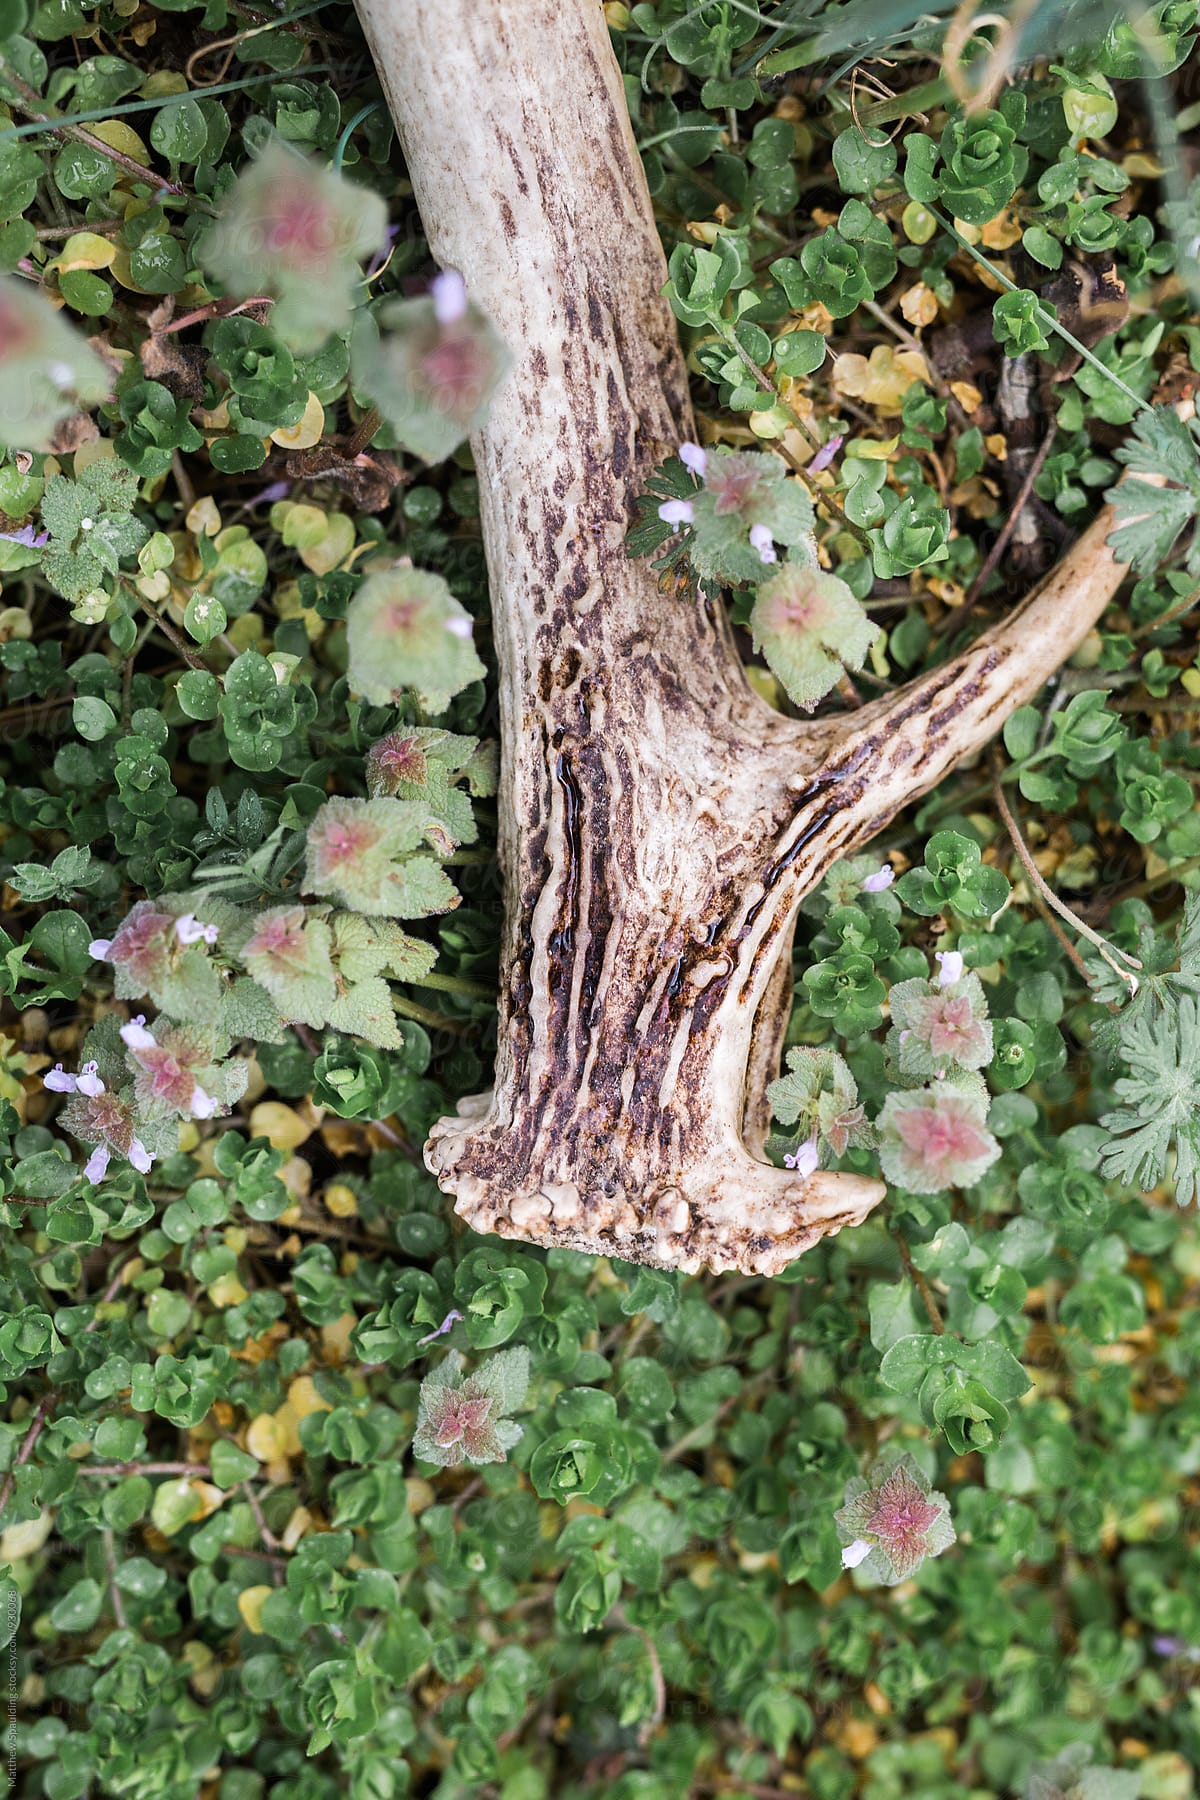 Deer antler shed on ground in clover patch close up